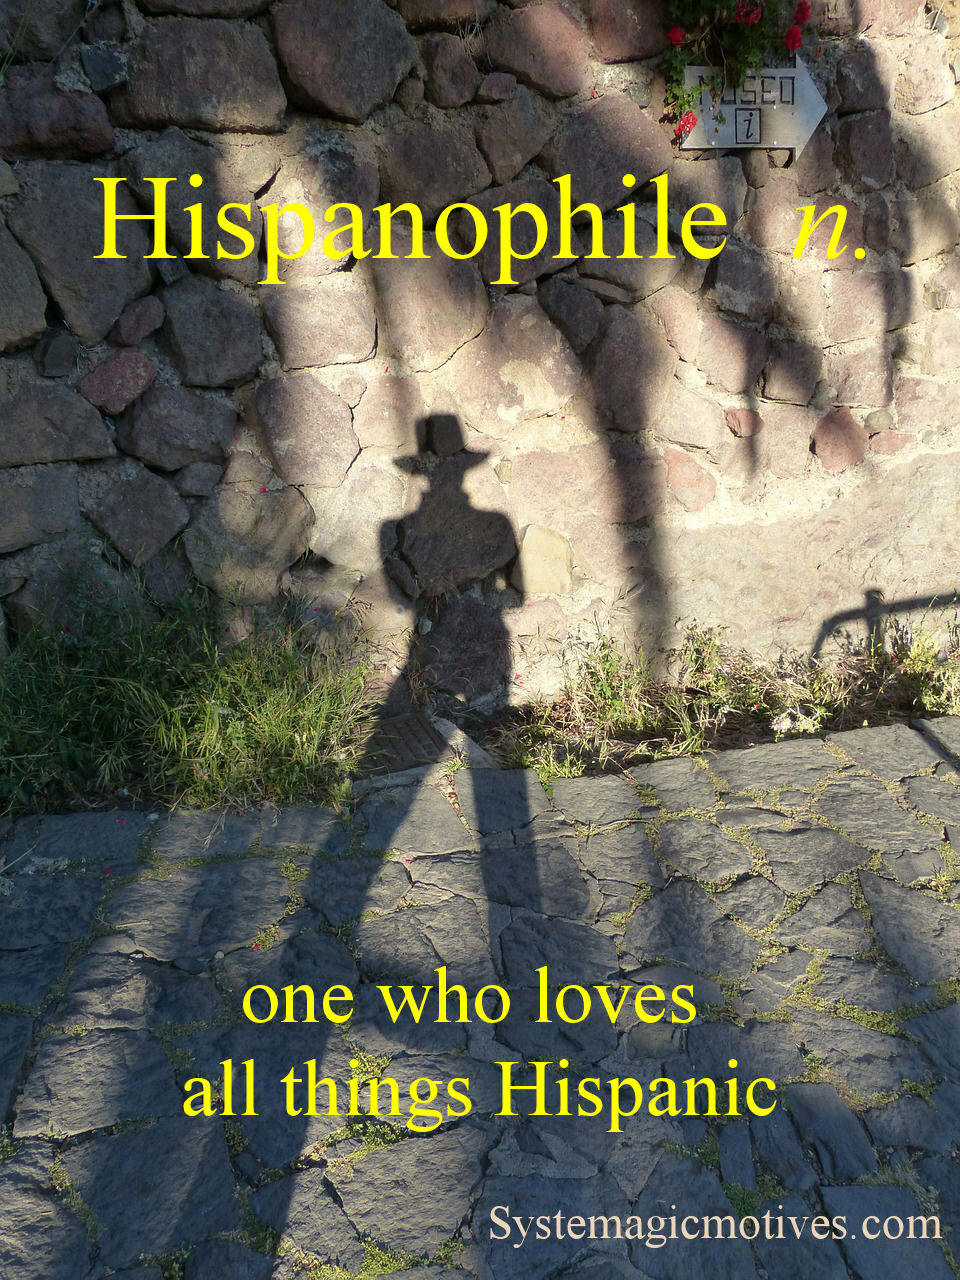 Graphic Definition of Hispanophile